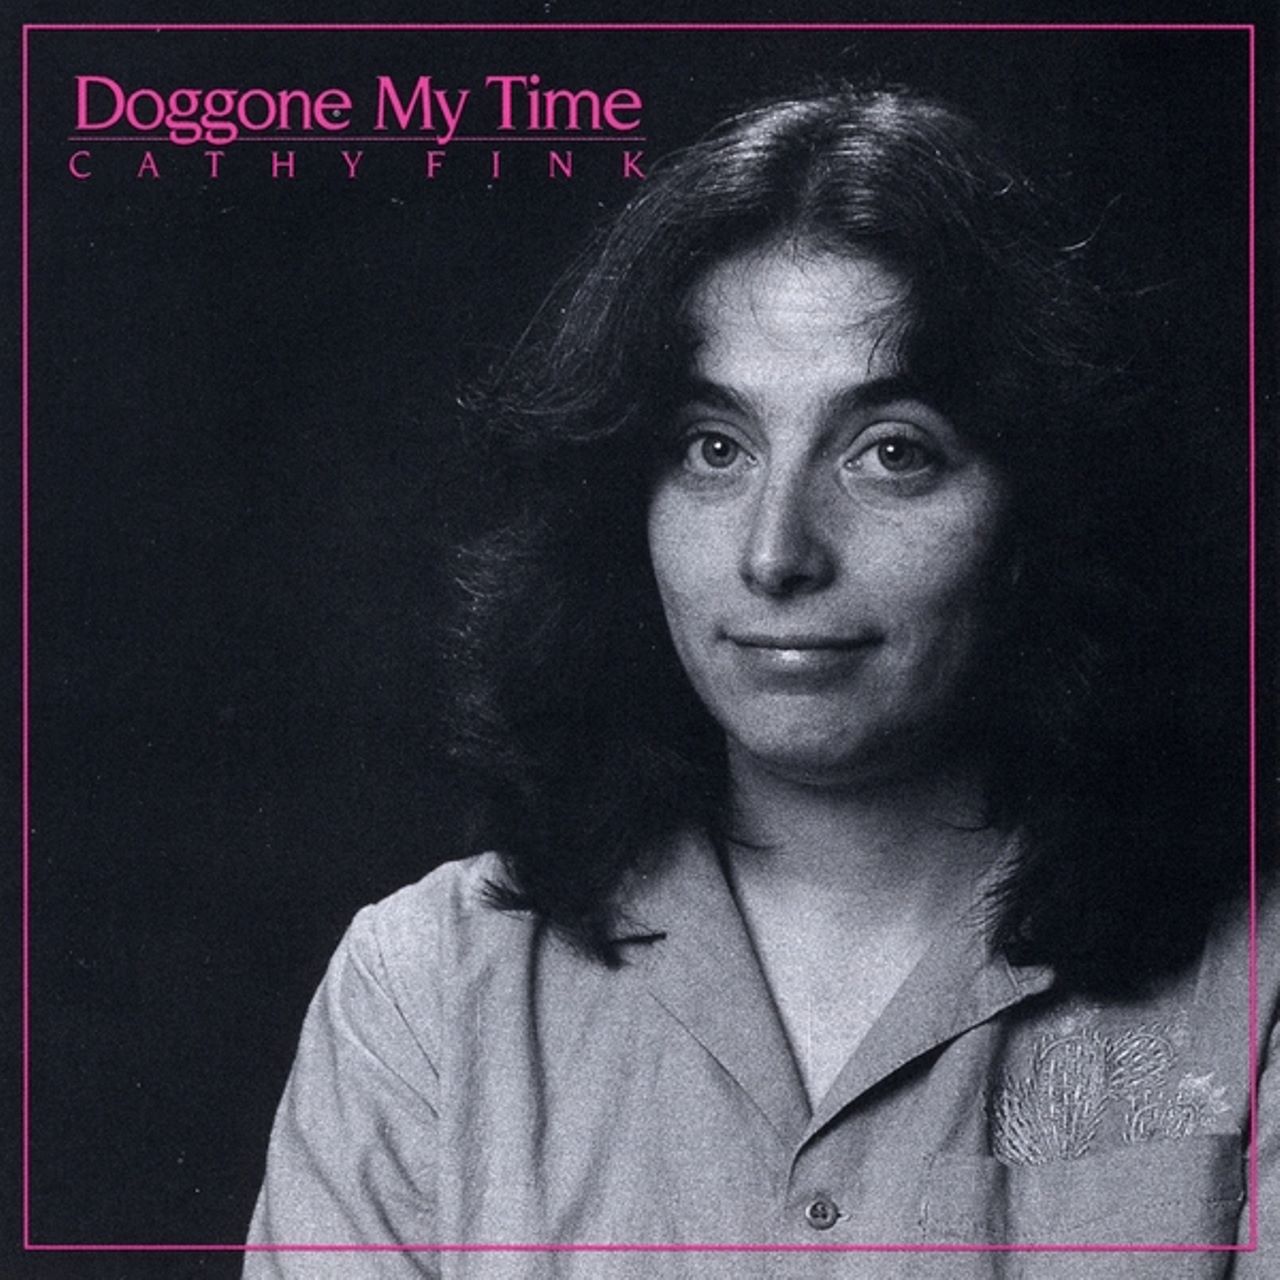 Cathy Fink - Doggone My Time cover album